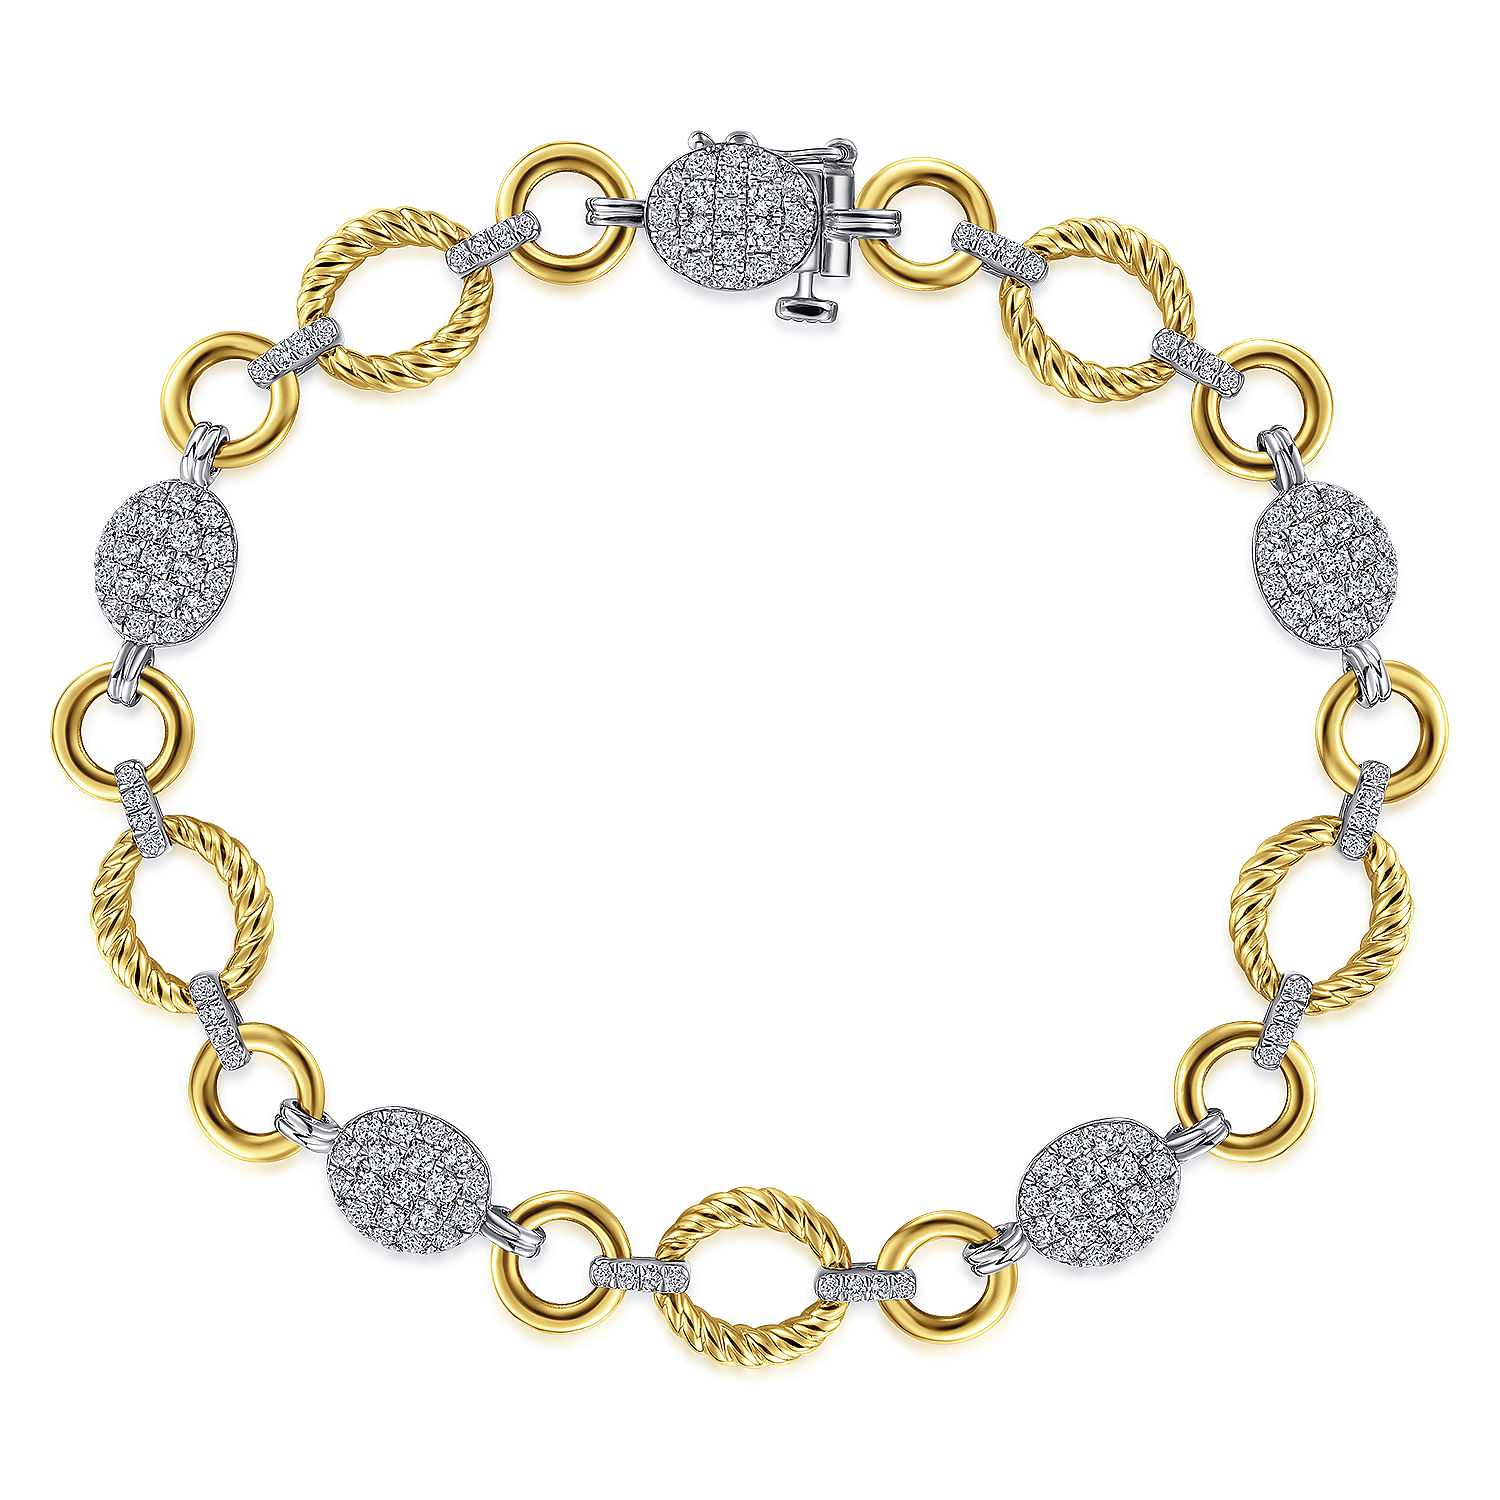 14K-Yellow-White-Gold-Twisted-Rope-Link-Bracelet-with-Pave-Diamond-Cluster-Stations1